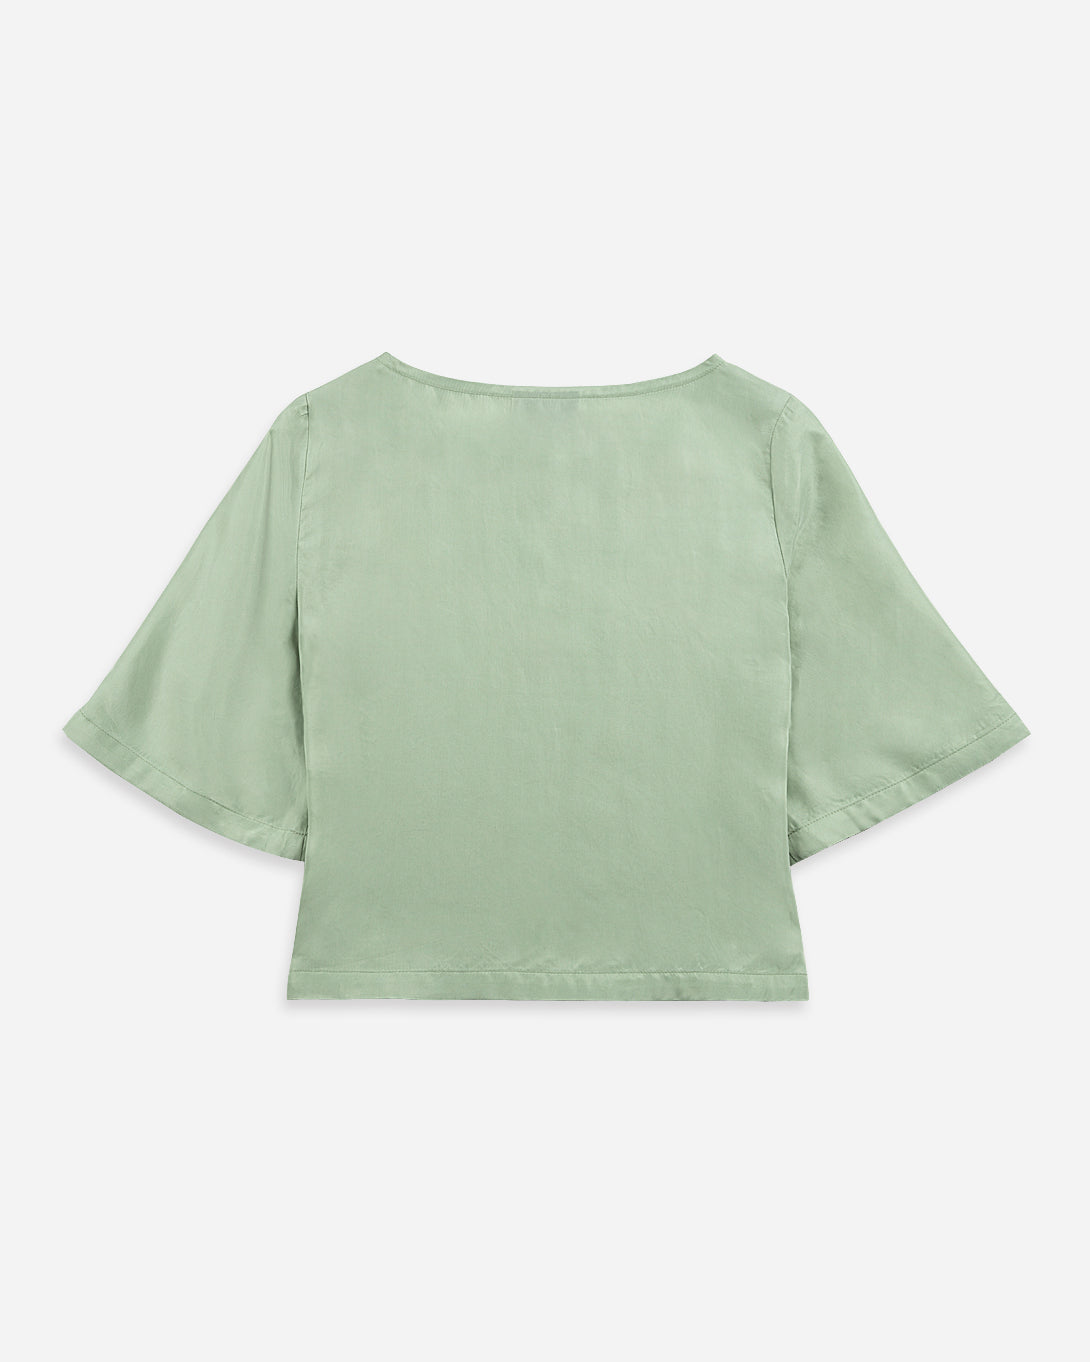 Ocean Wave Fluid Boxy Top Womens Cropped Shirt